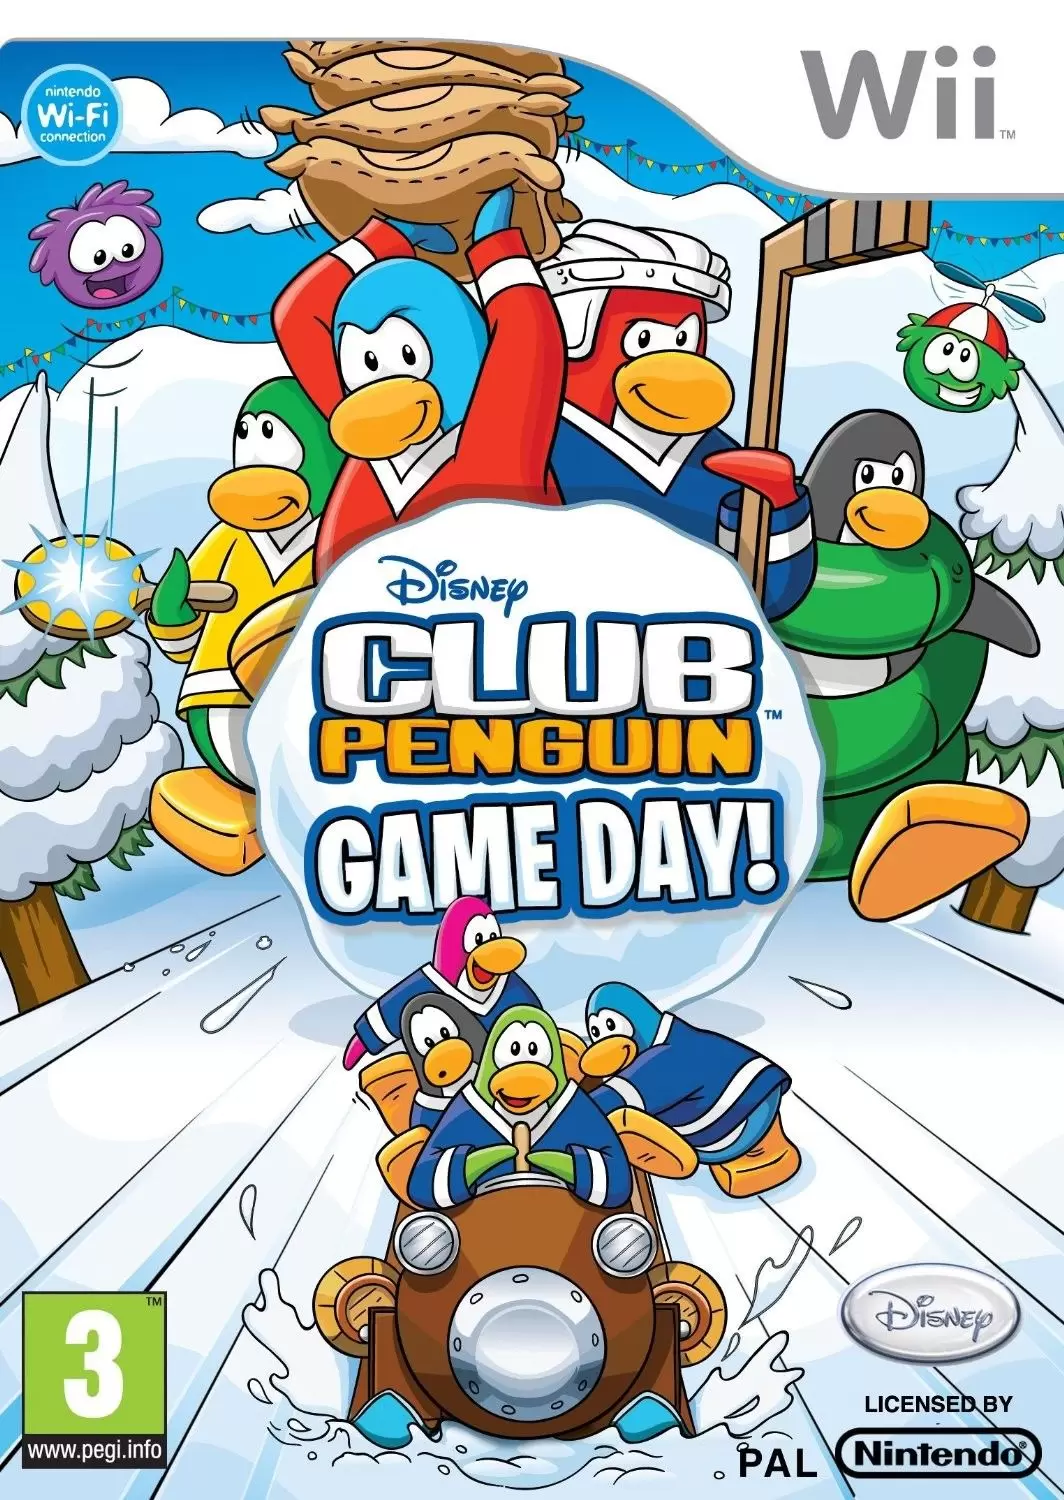 Nintendo Wii Games - Club Penguin: Game Day